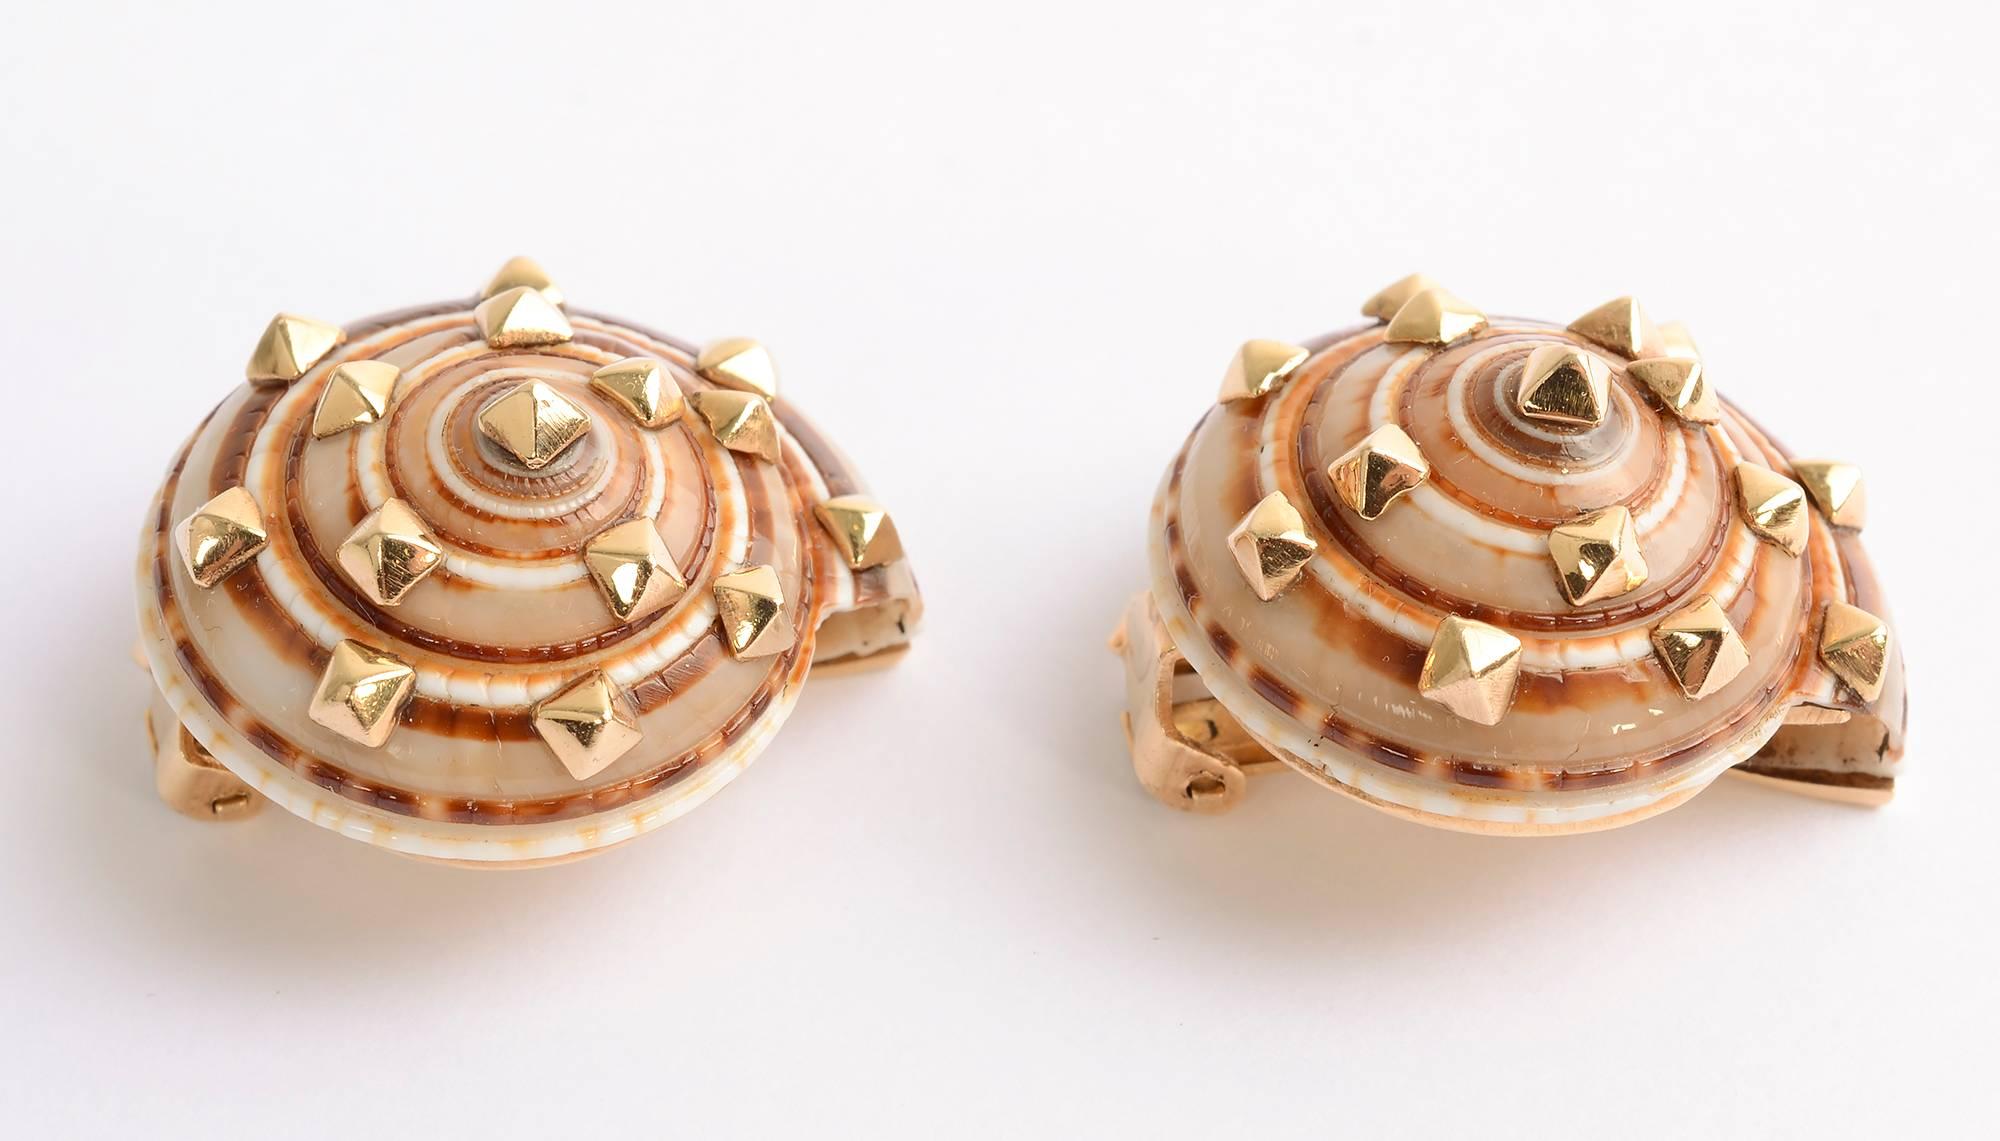 Beautiful shell earrings by PSV of Seaman Schepps. In the 1960's, the founder retired and his daughter, Patricia took over until she sold the company in 1992.  PSV are her initials. 
These wonderfully colored shells are studded with raised gold